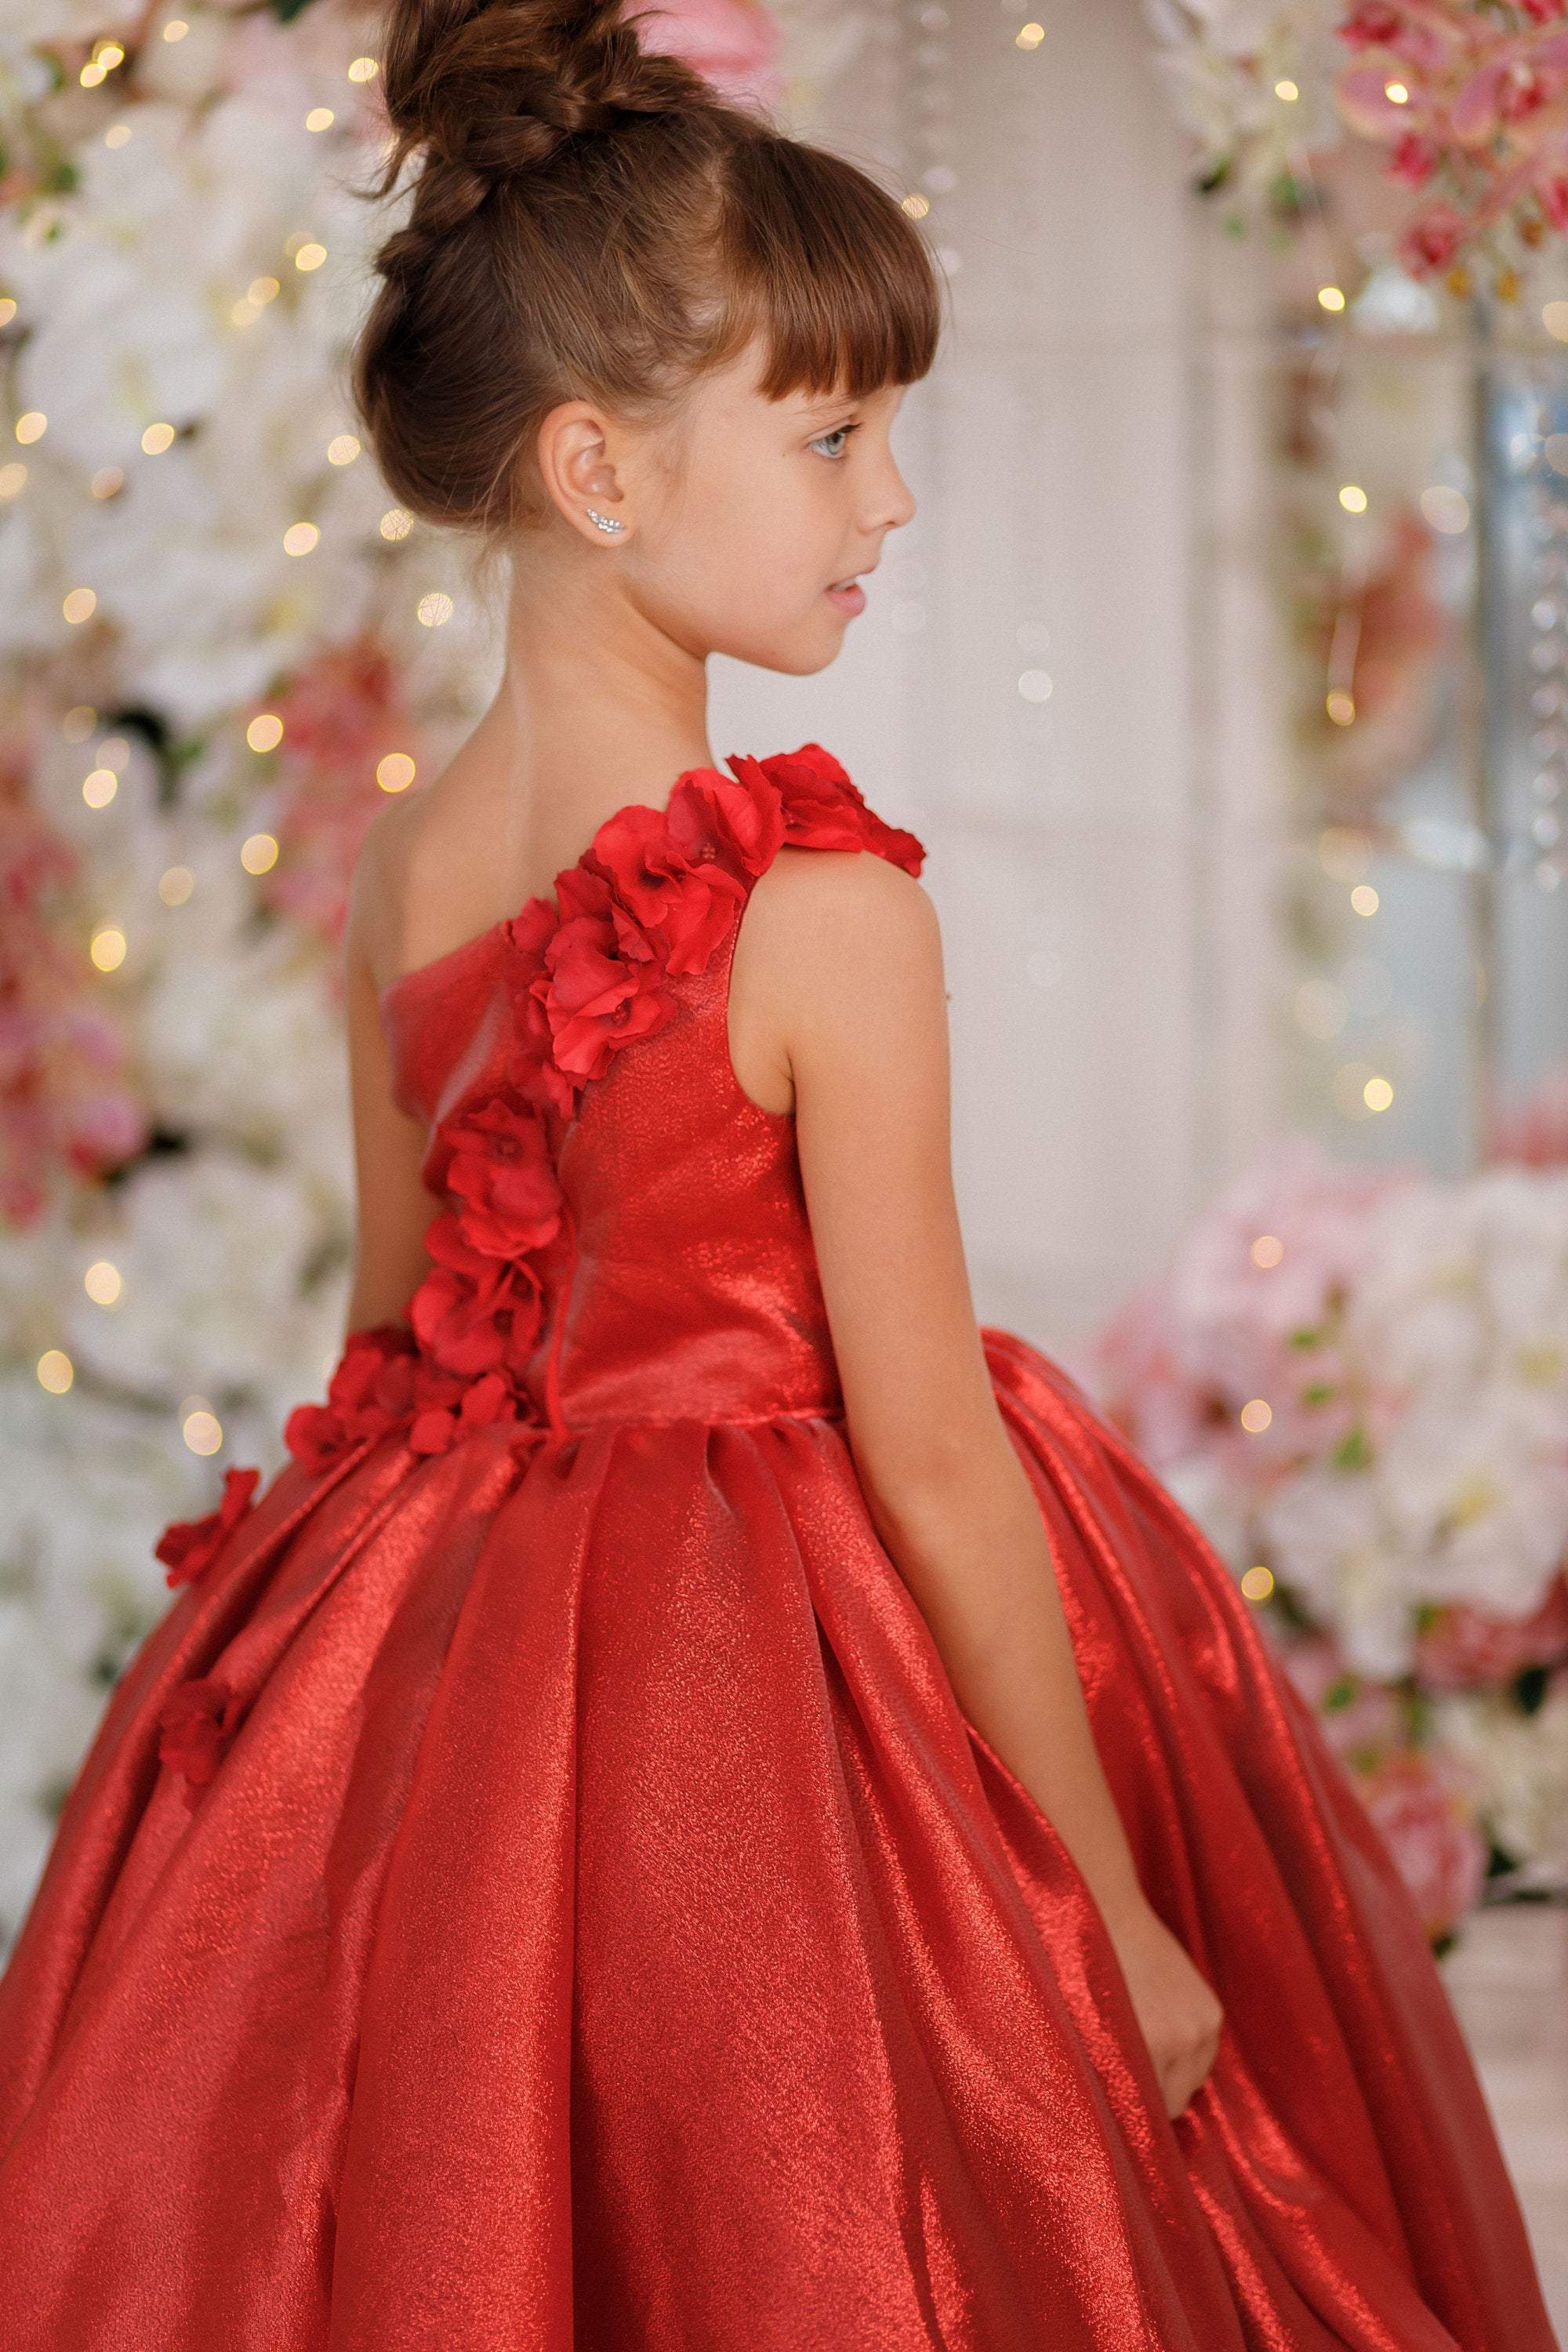 Pejock 6M-3 Years Kids Pageant Flower Girl Dress Little Girls Party Wedding  Formal Dresses Toddler Girls Satin Embroidery Rhinestone Bowknot Birthday  Party Gown Long Dresses - Walmart.com